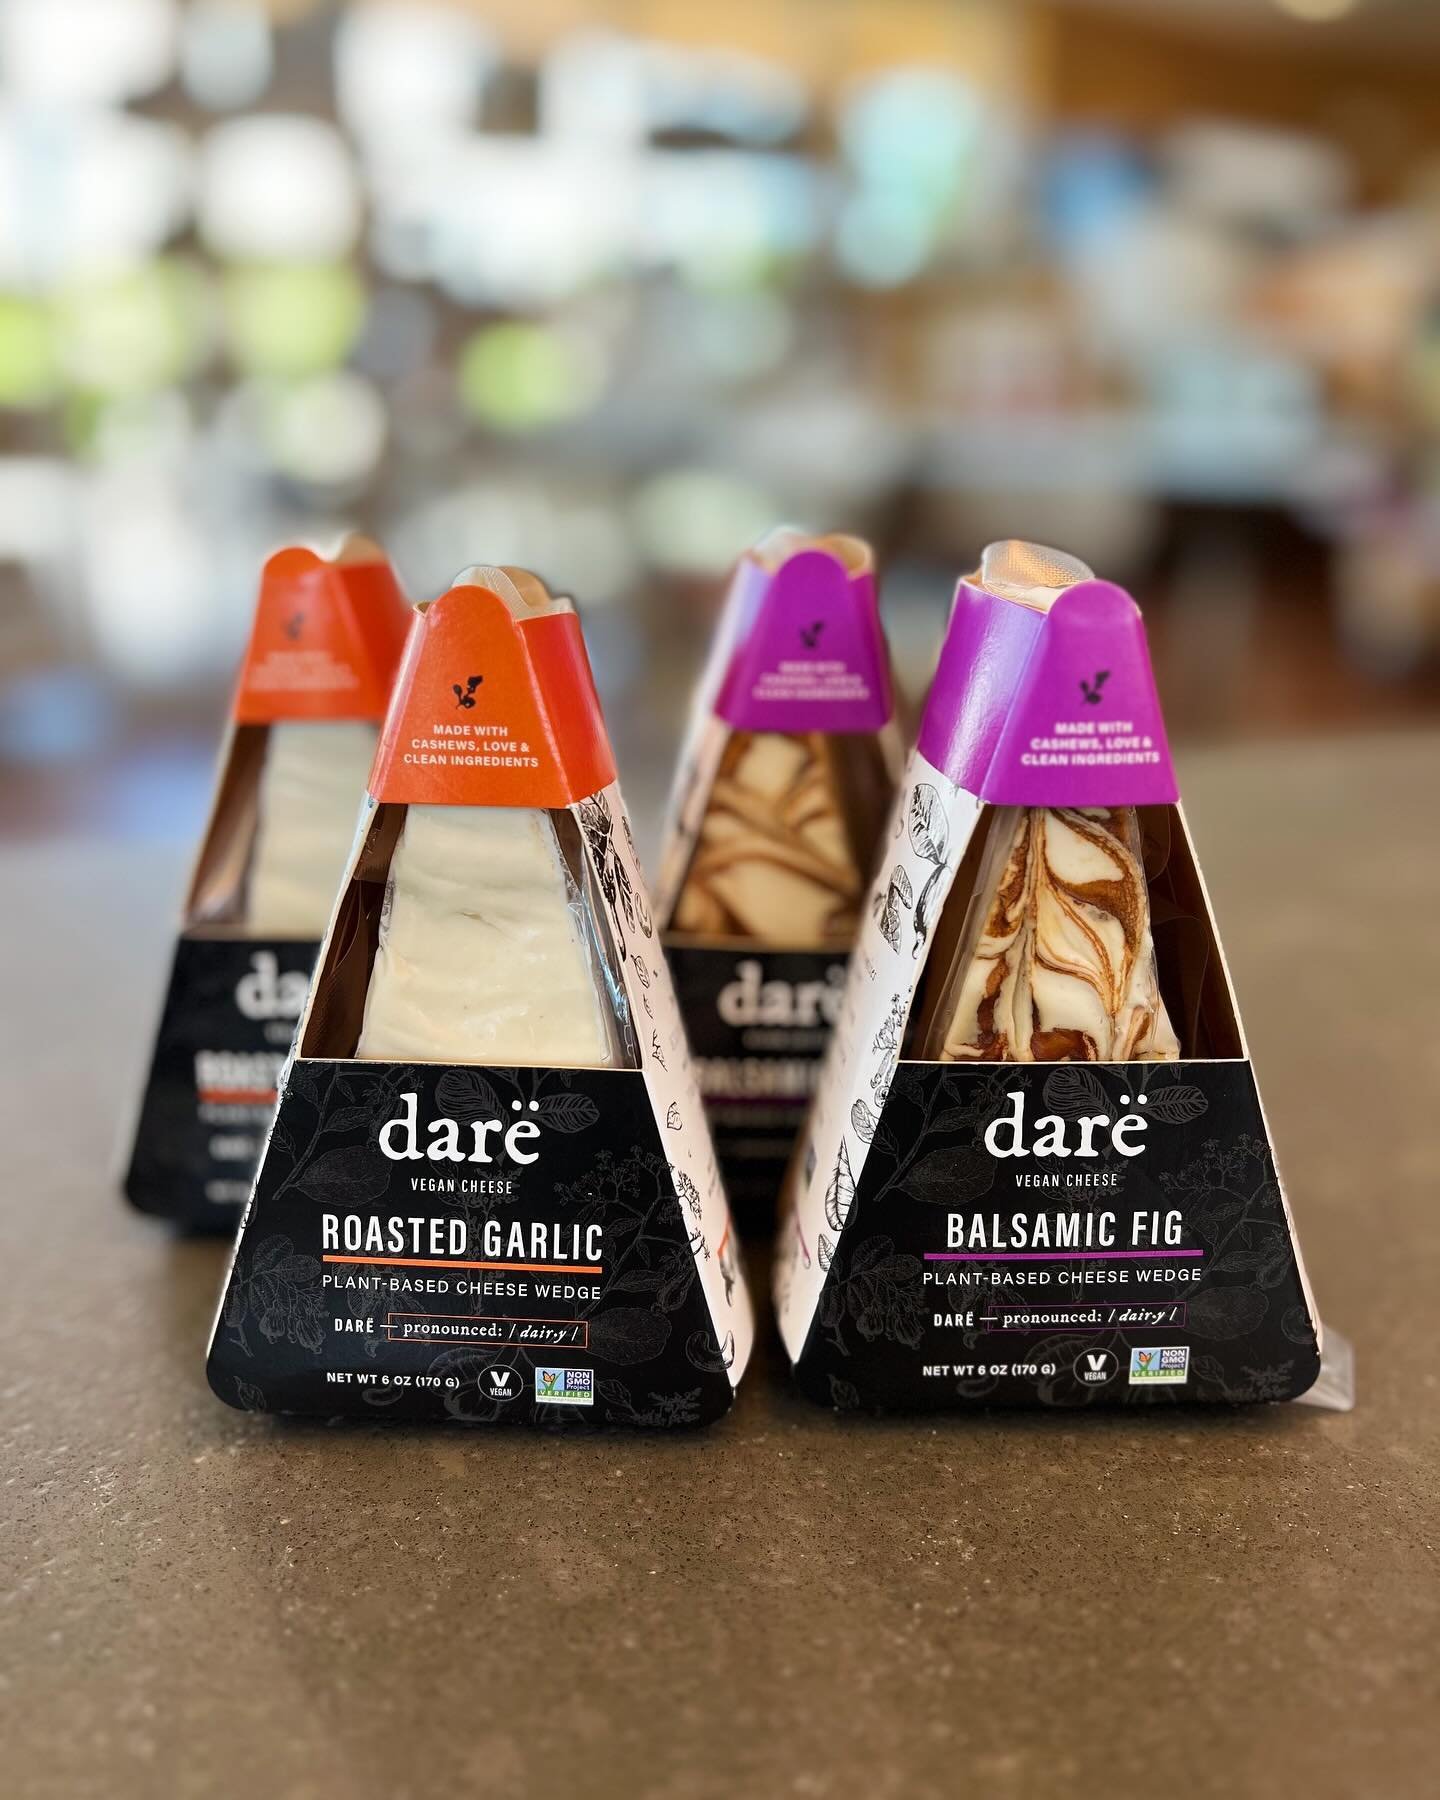 NEW‼️ We have a few products from @darevegancheese blessing us with their AMAZING vegan cheeses! Even if you aren&rsquo;t vegan, this are a must try!! Great additions to our crostini&rsquo;s and crackers 😍